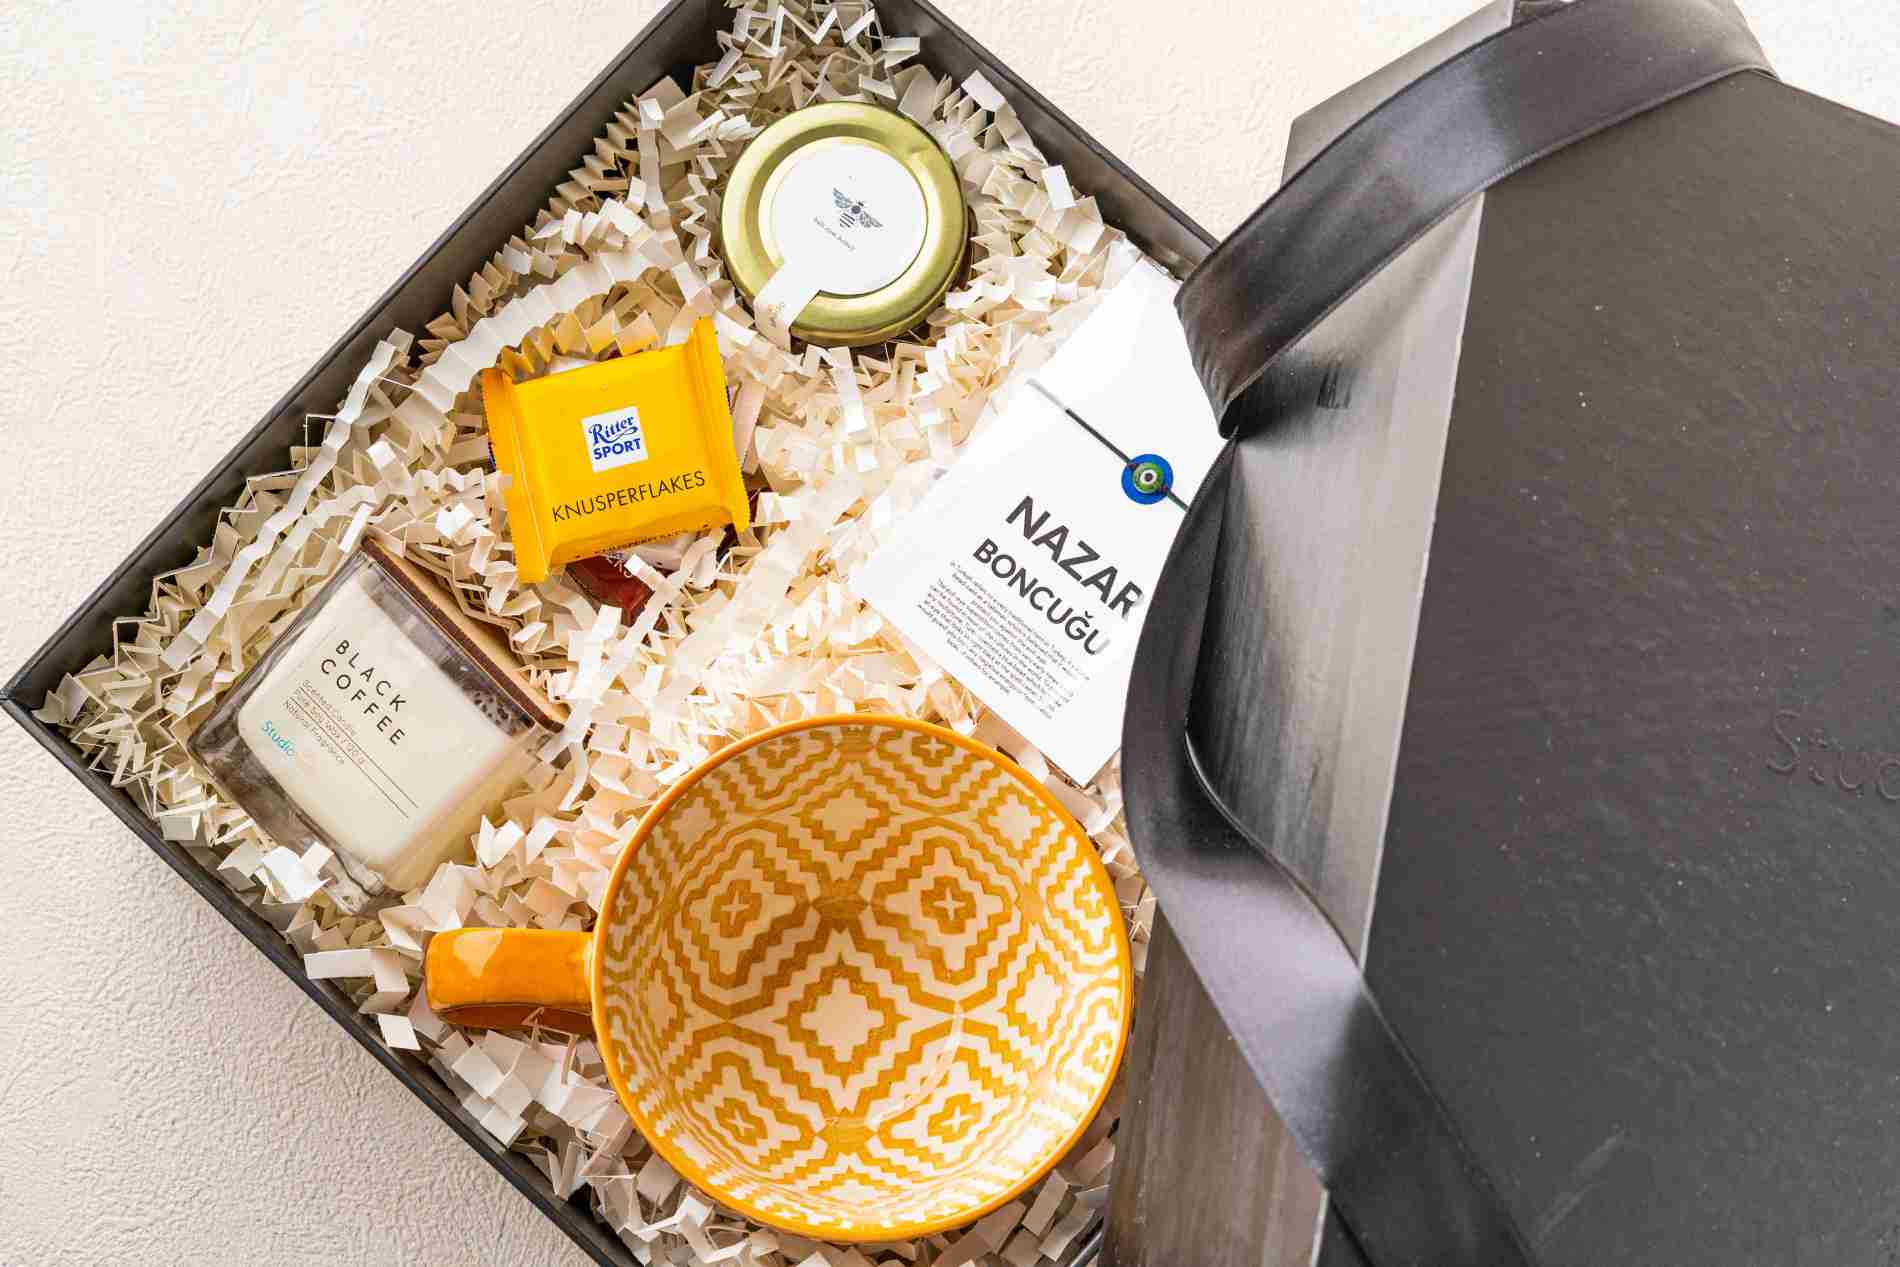 Corporate hampers can be a way to show appreciation and care towards employees, even more so during this physical distancing period due to the COVID-19 pandemic